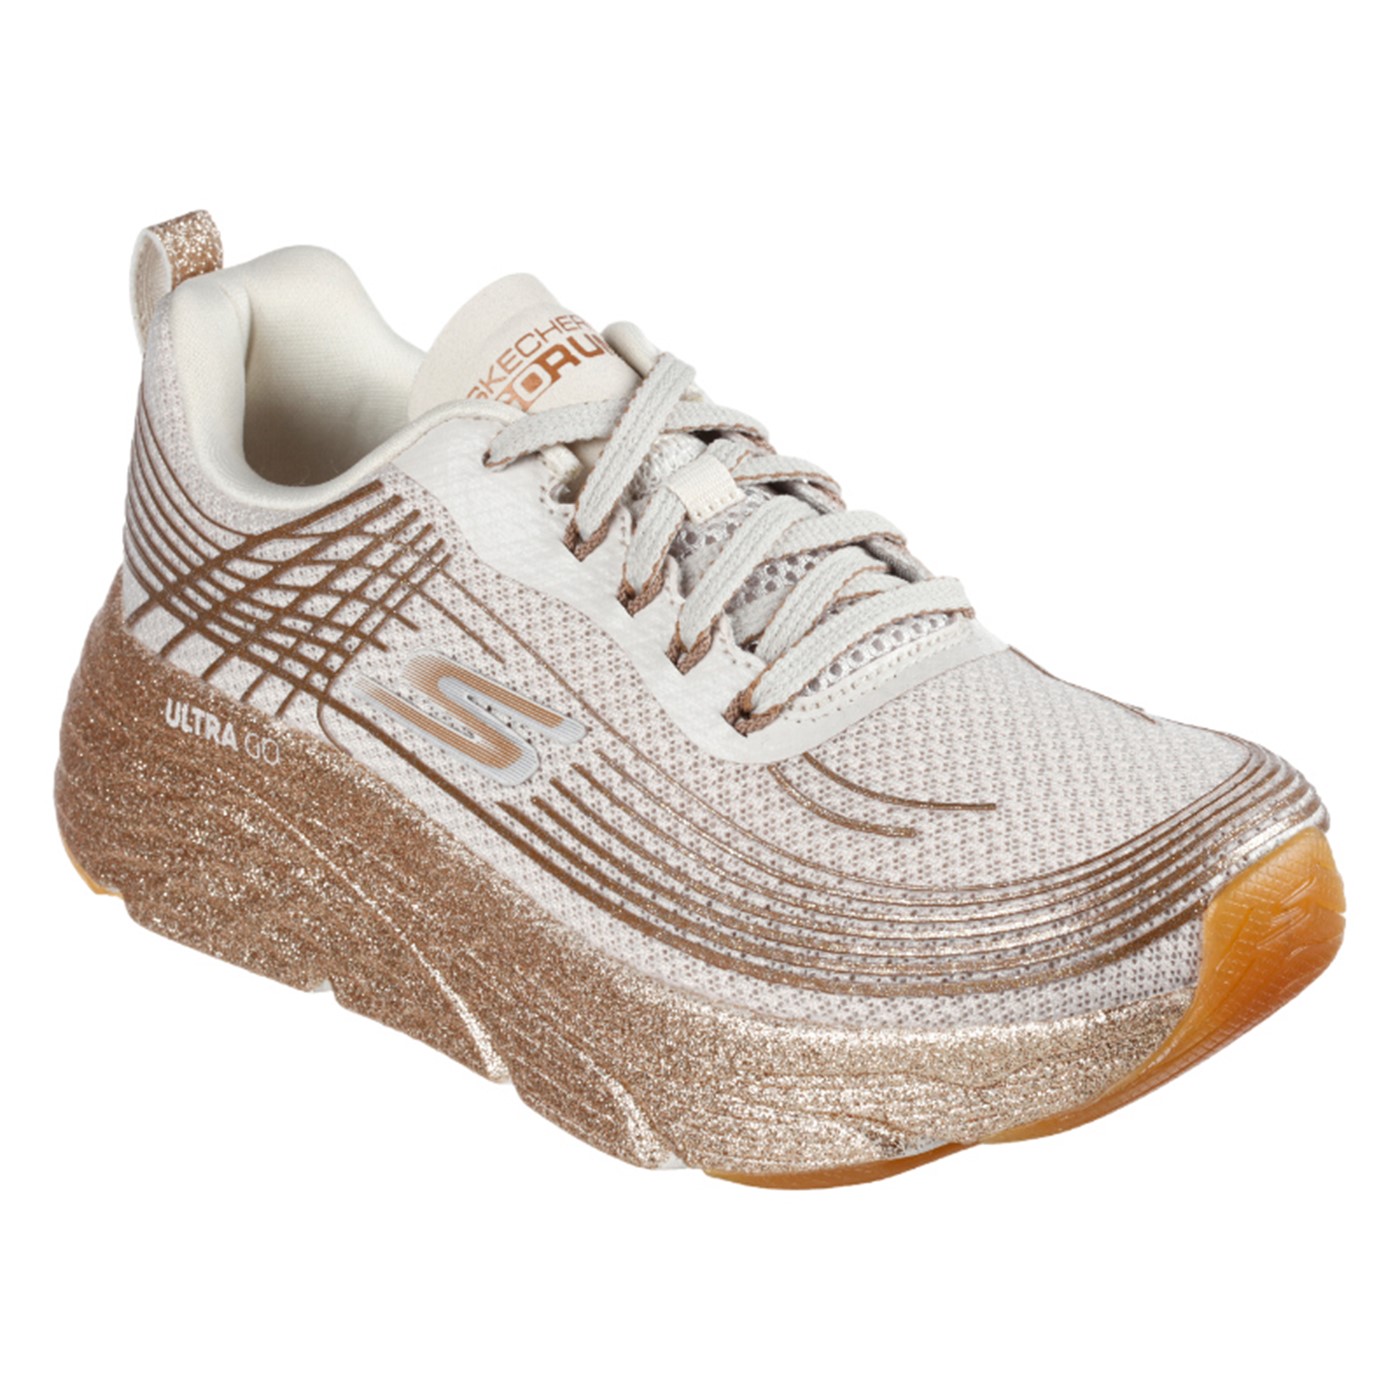 » Max Cushioning - Dame Sneakers Guld